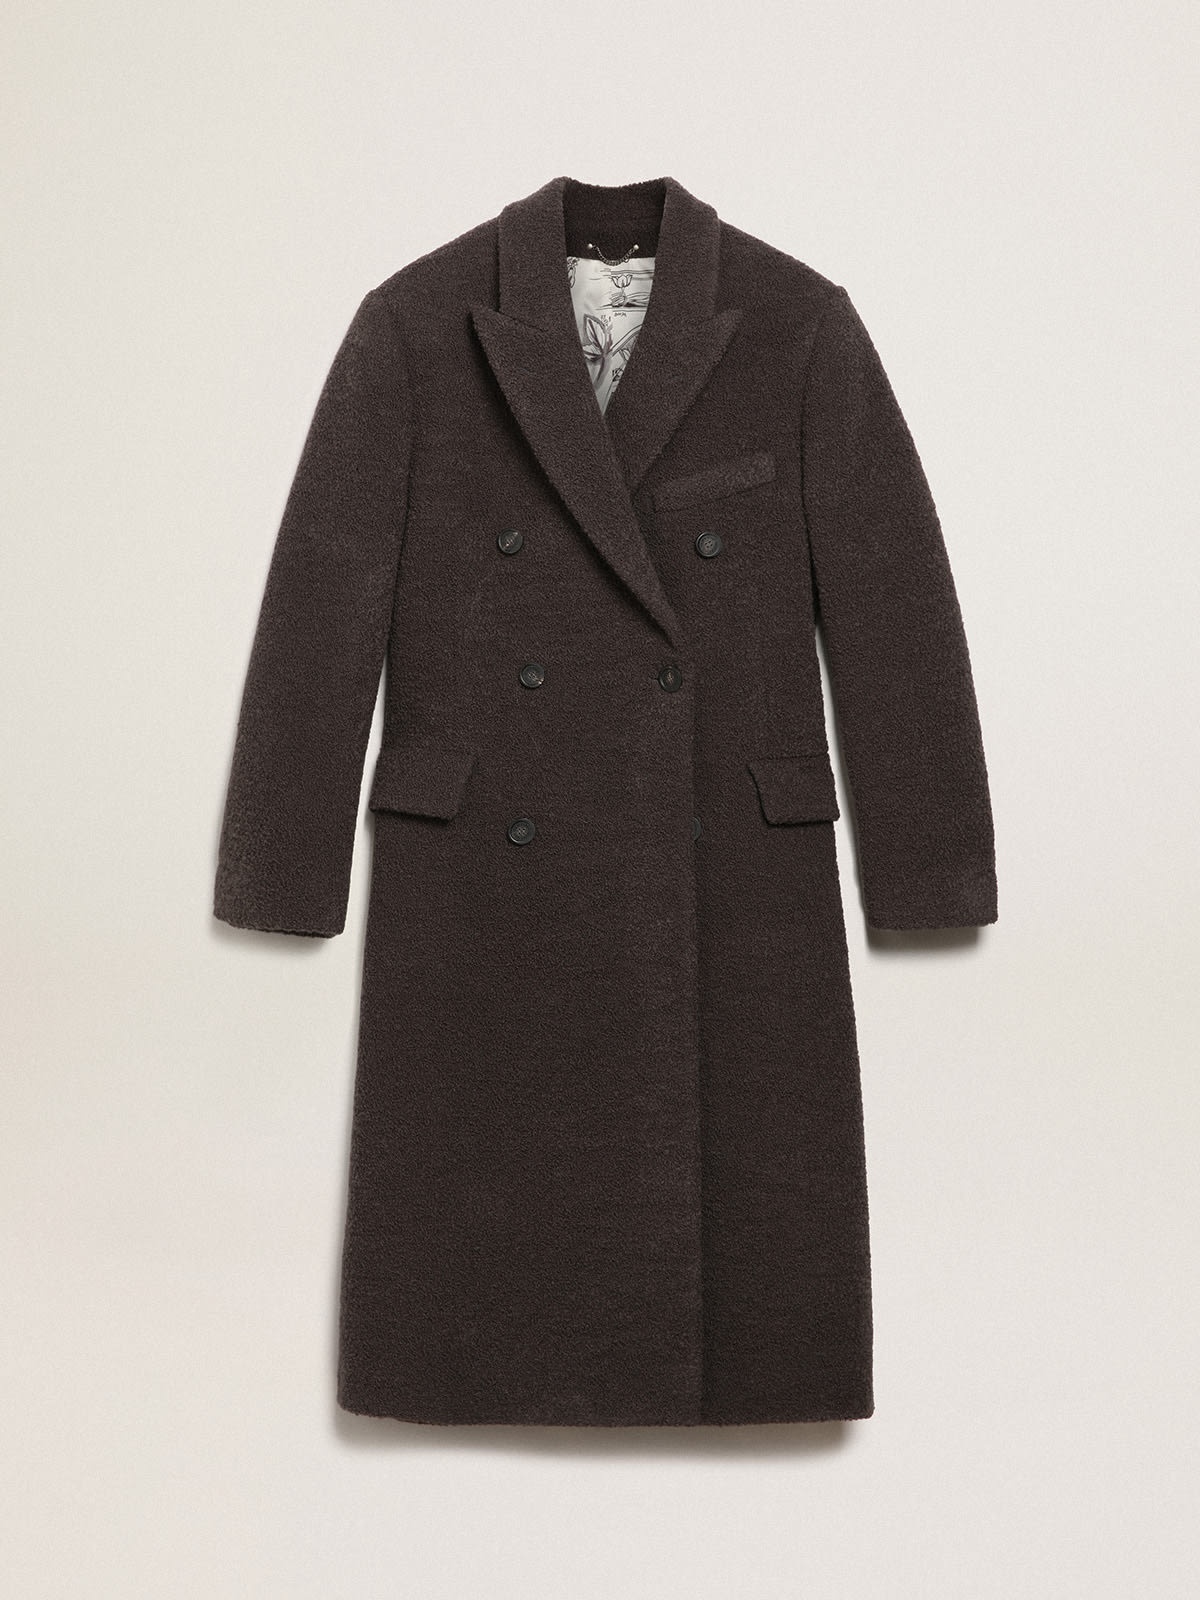 Men's double-breasted coat in licorice-colored bouclé wool - 1